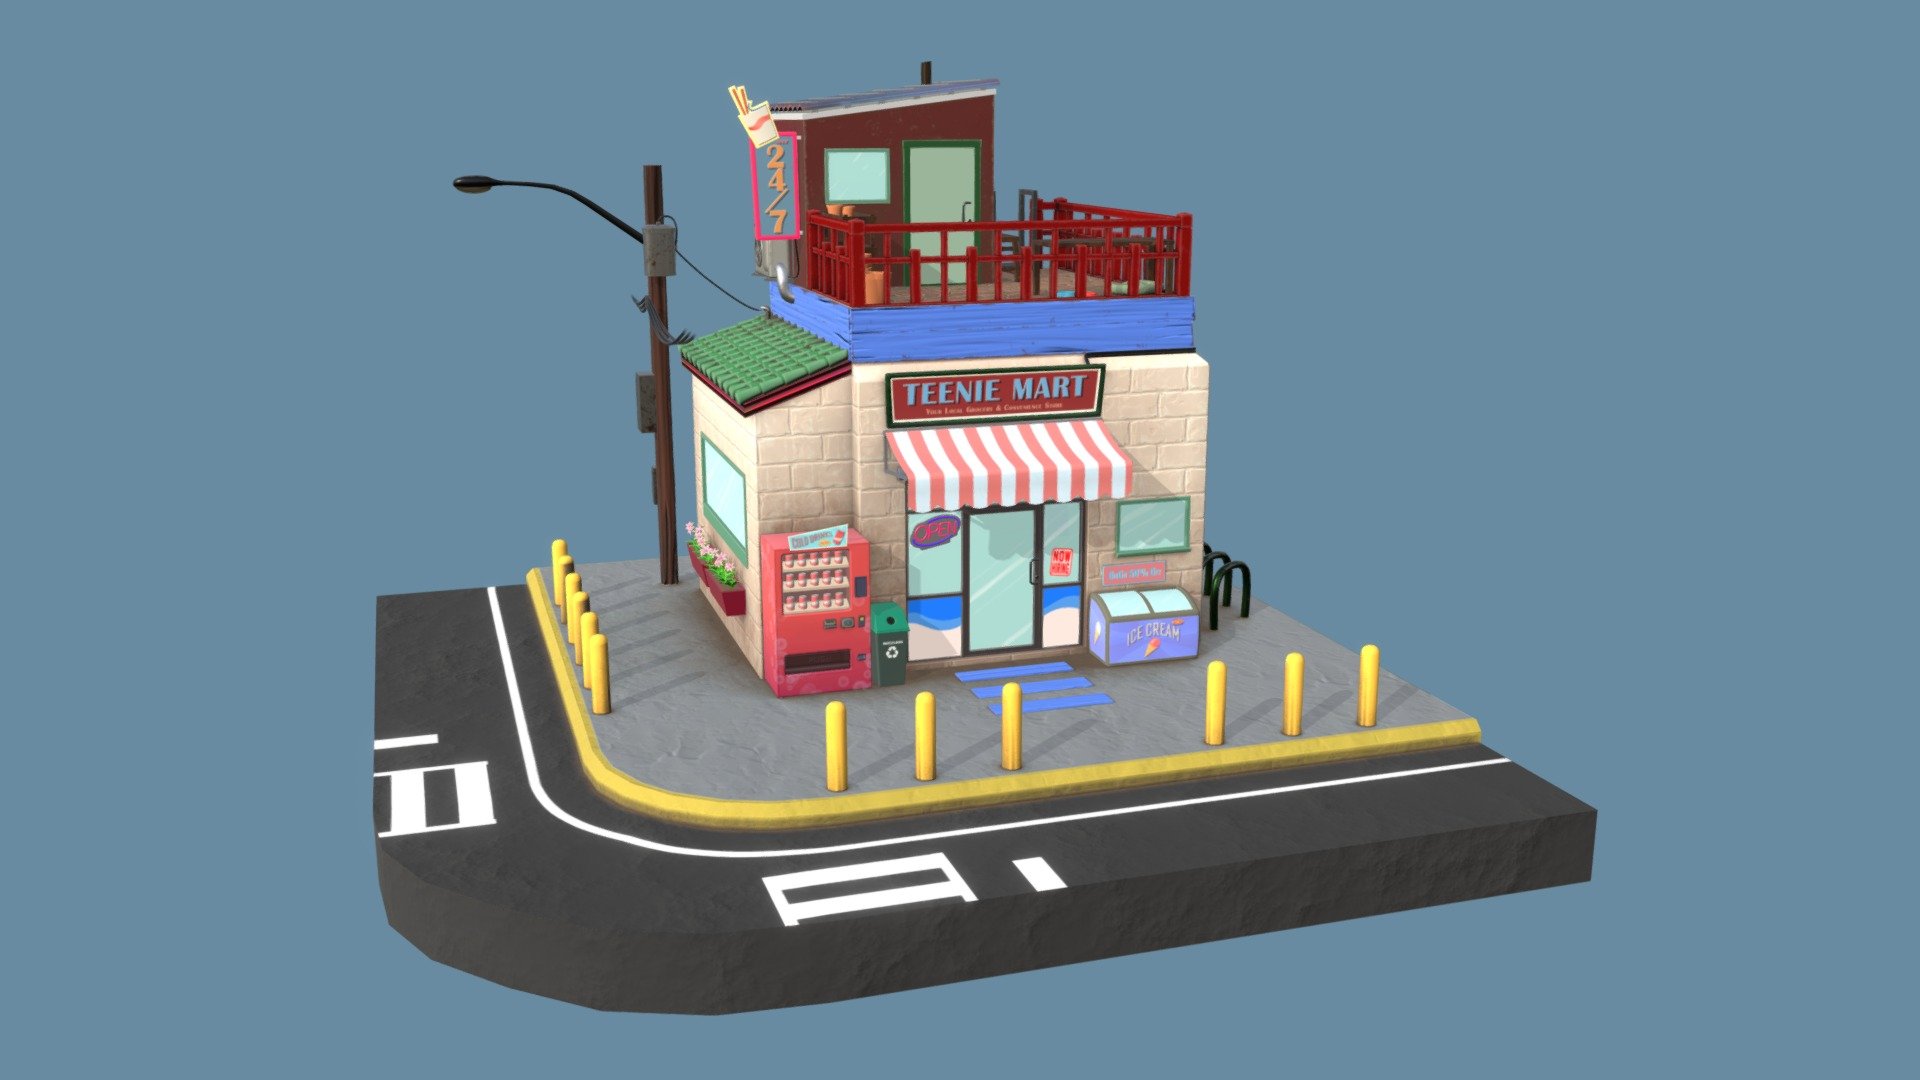 Teenie Mart diorama:
Senior Student Capstone Project for Digital Worlds Institute at the University of Florida
Convergence 2022

https://www.behance.net/gallery/134733101/Teenie-Mart - Teenie Mart - Convenience Store - 3D model by cal.cheung (@calcheung) 3d model